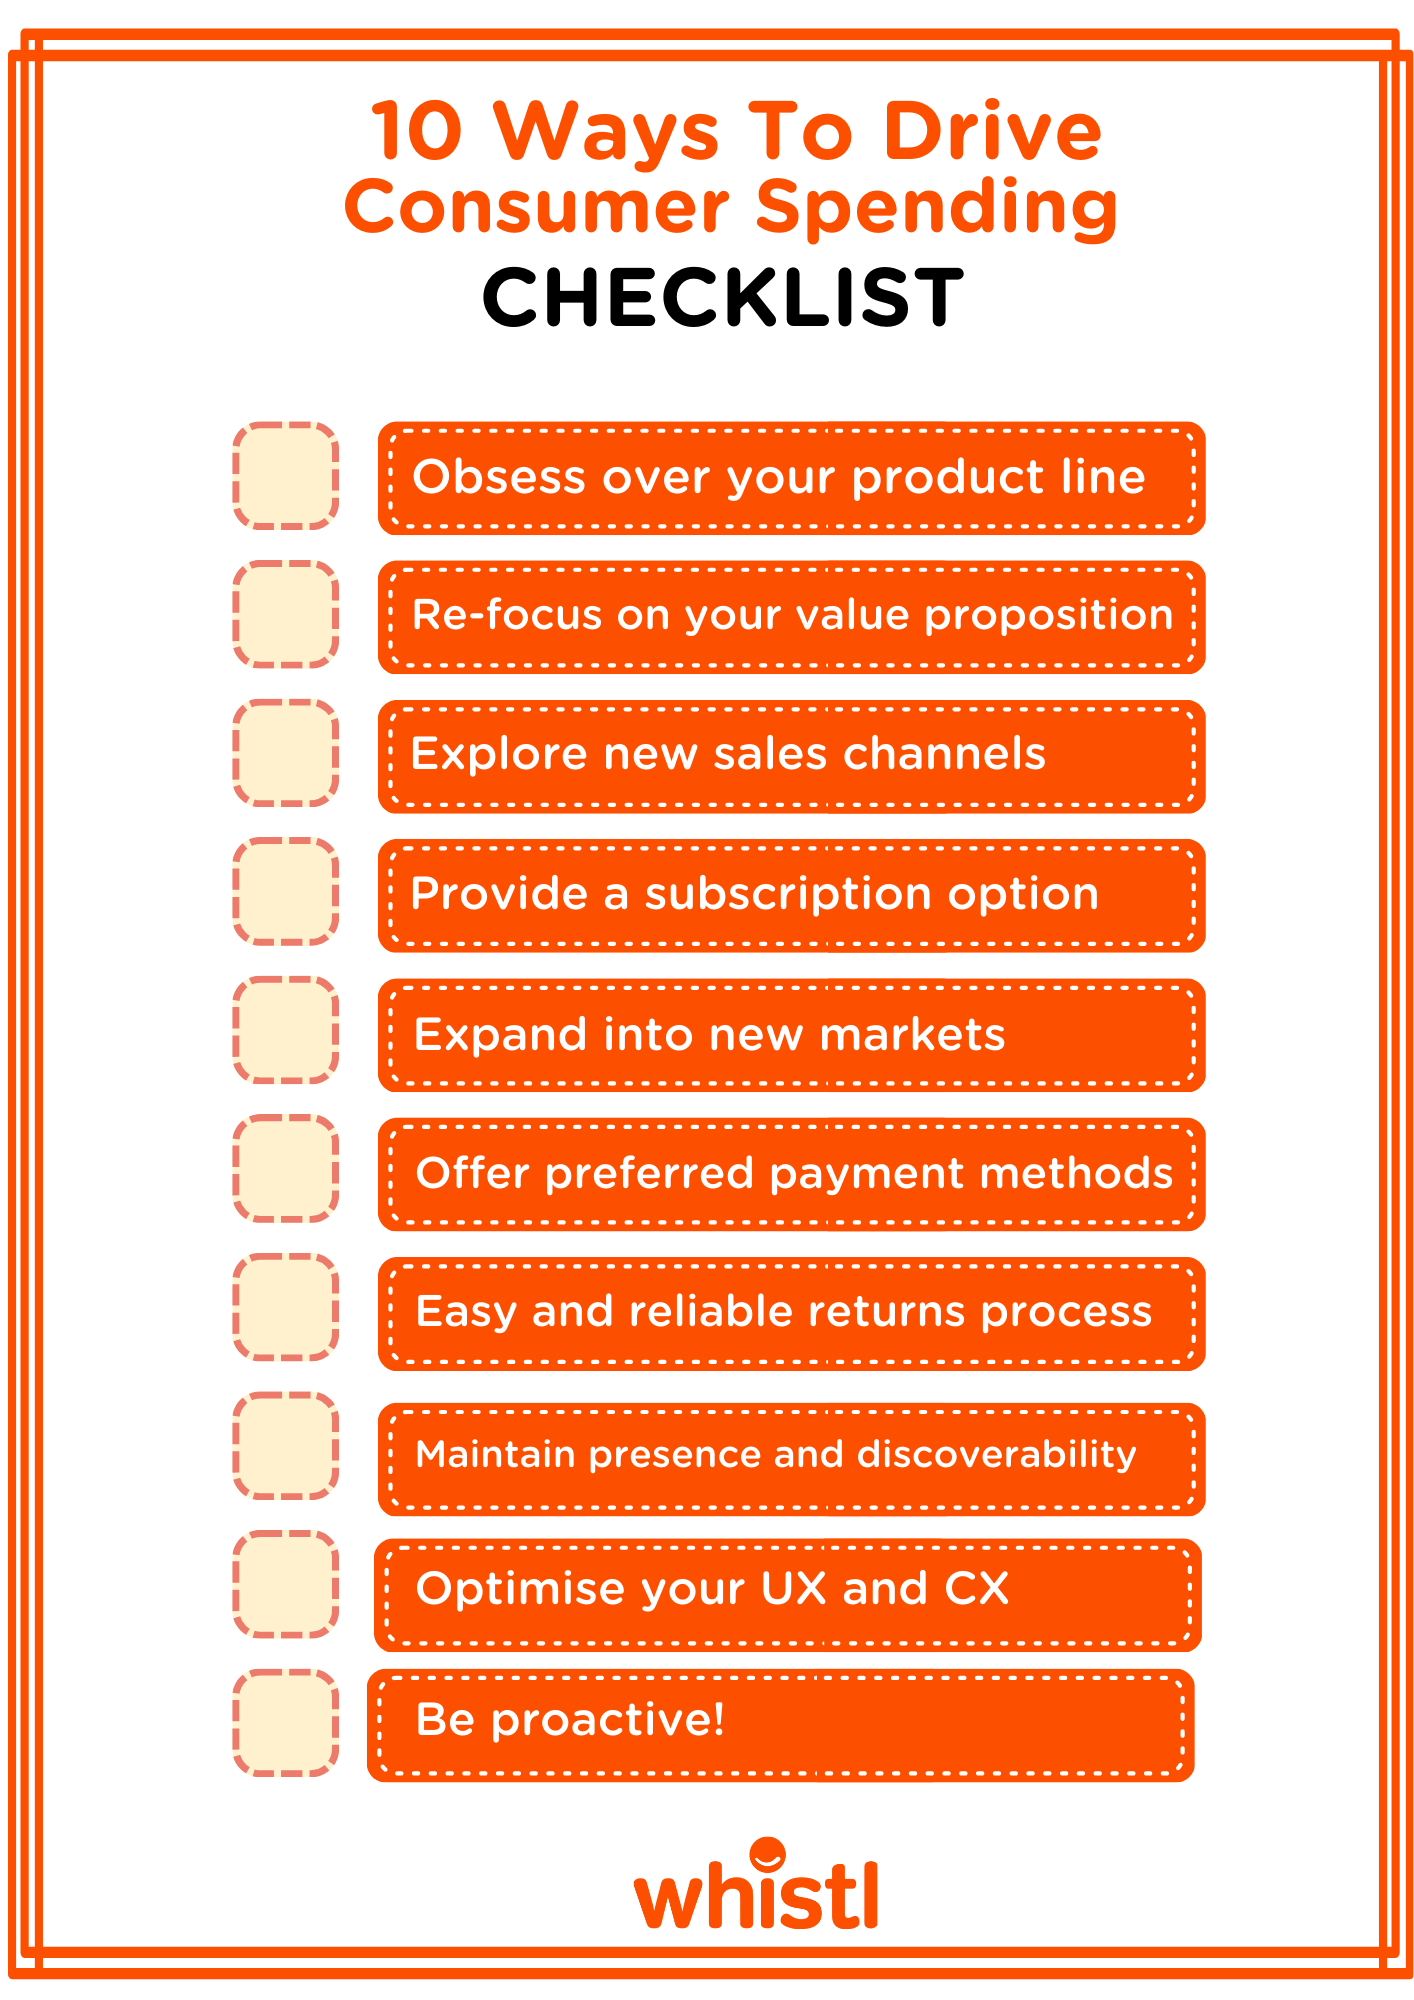 10 Ways eCommerce brands can drive consumer spending checklist